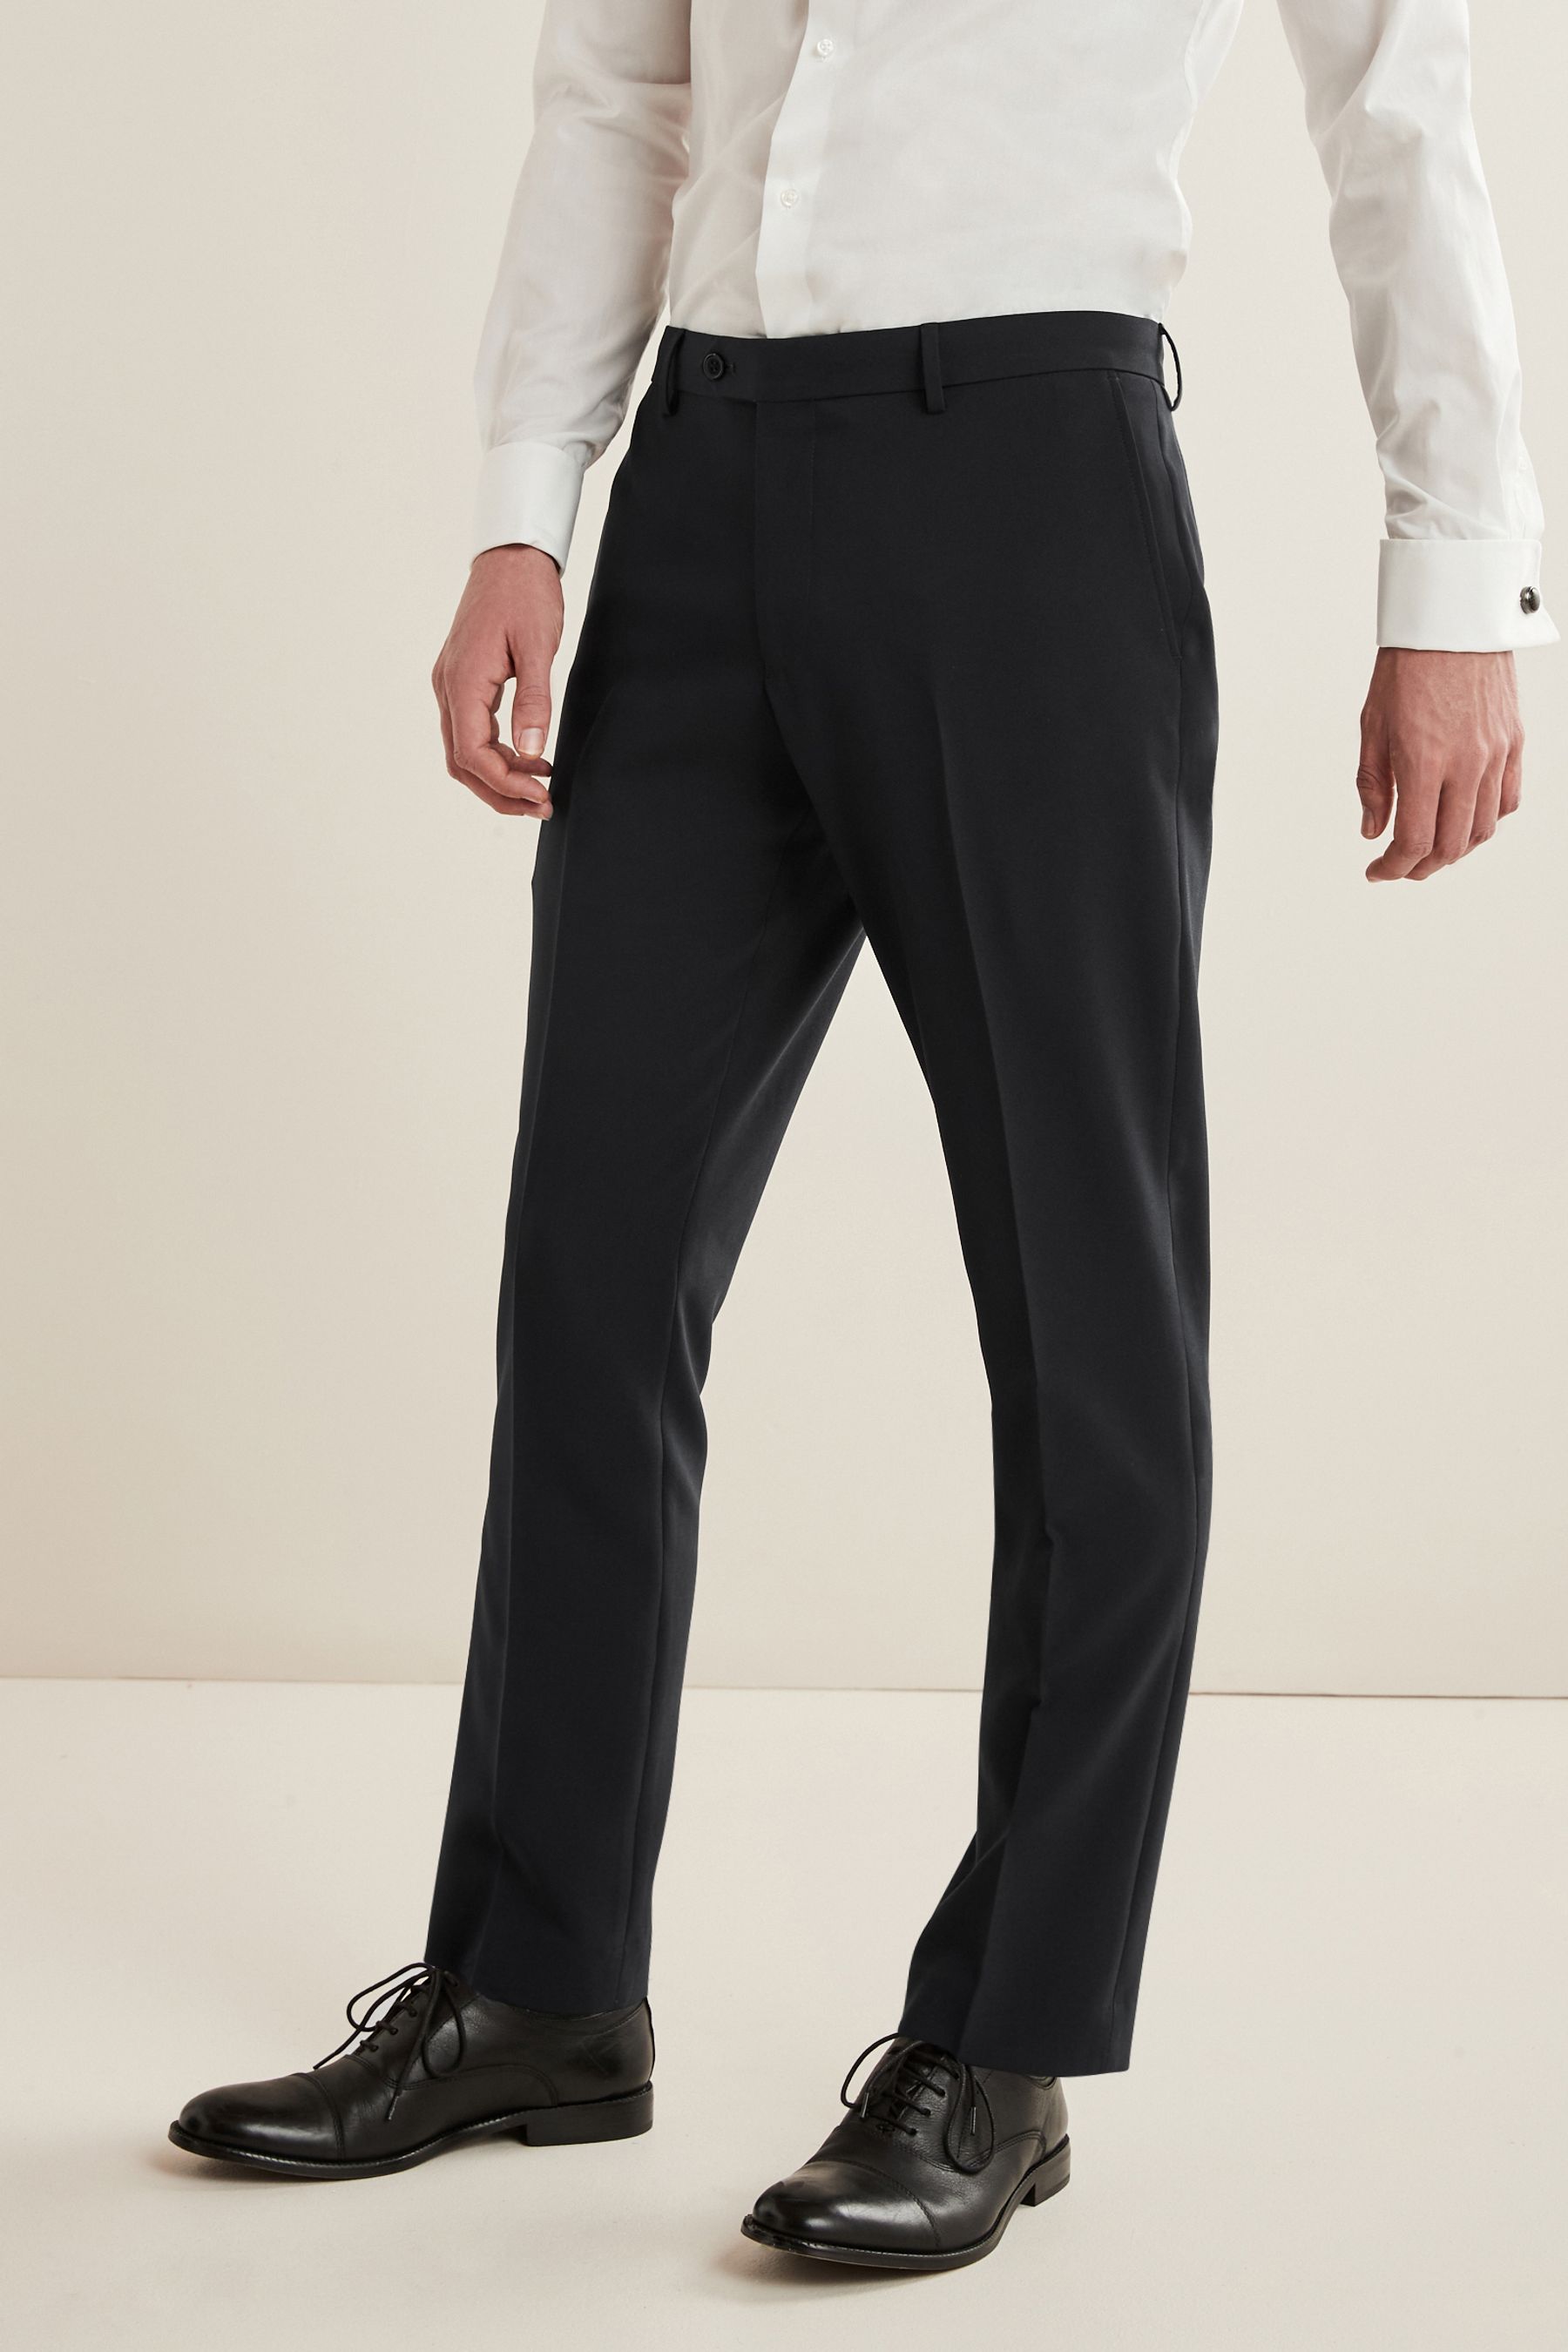 Buy Black Slim Essential Suit: Trousers from Next Ireland